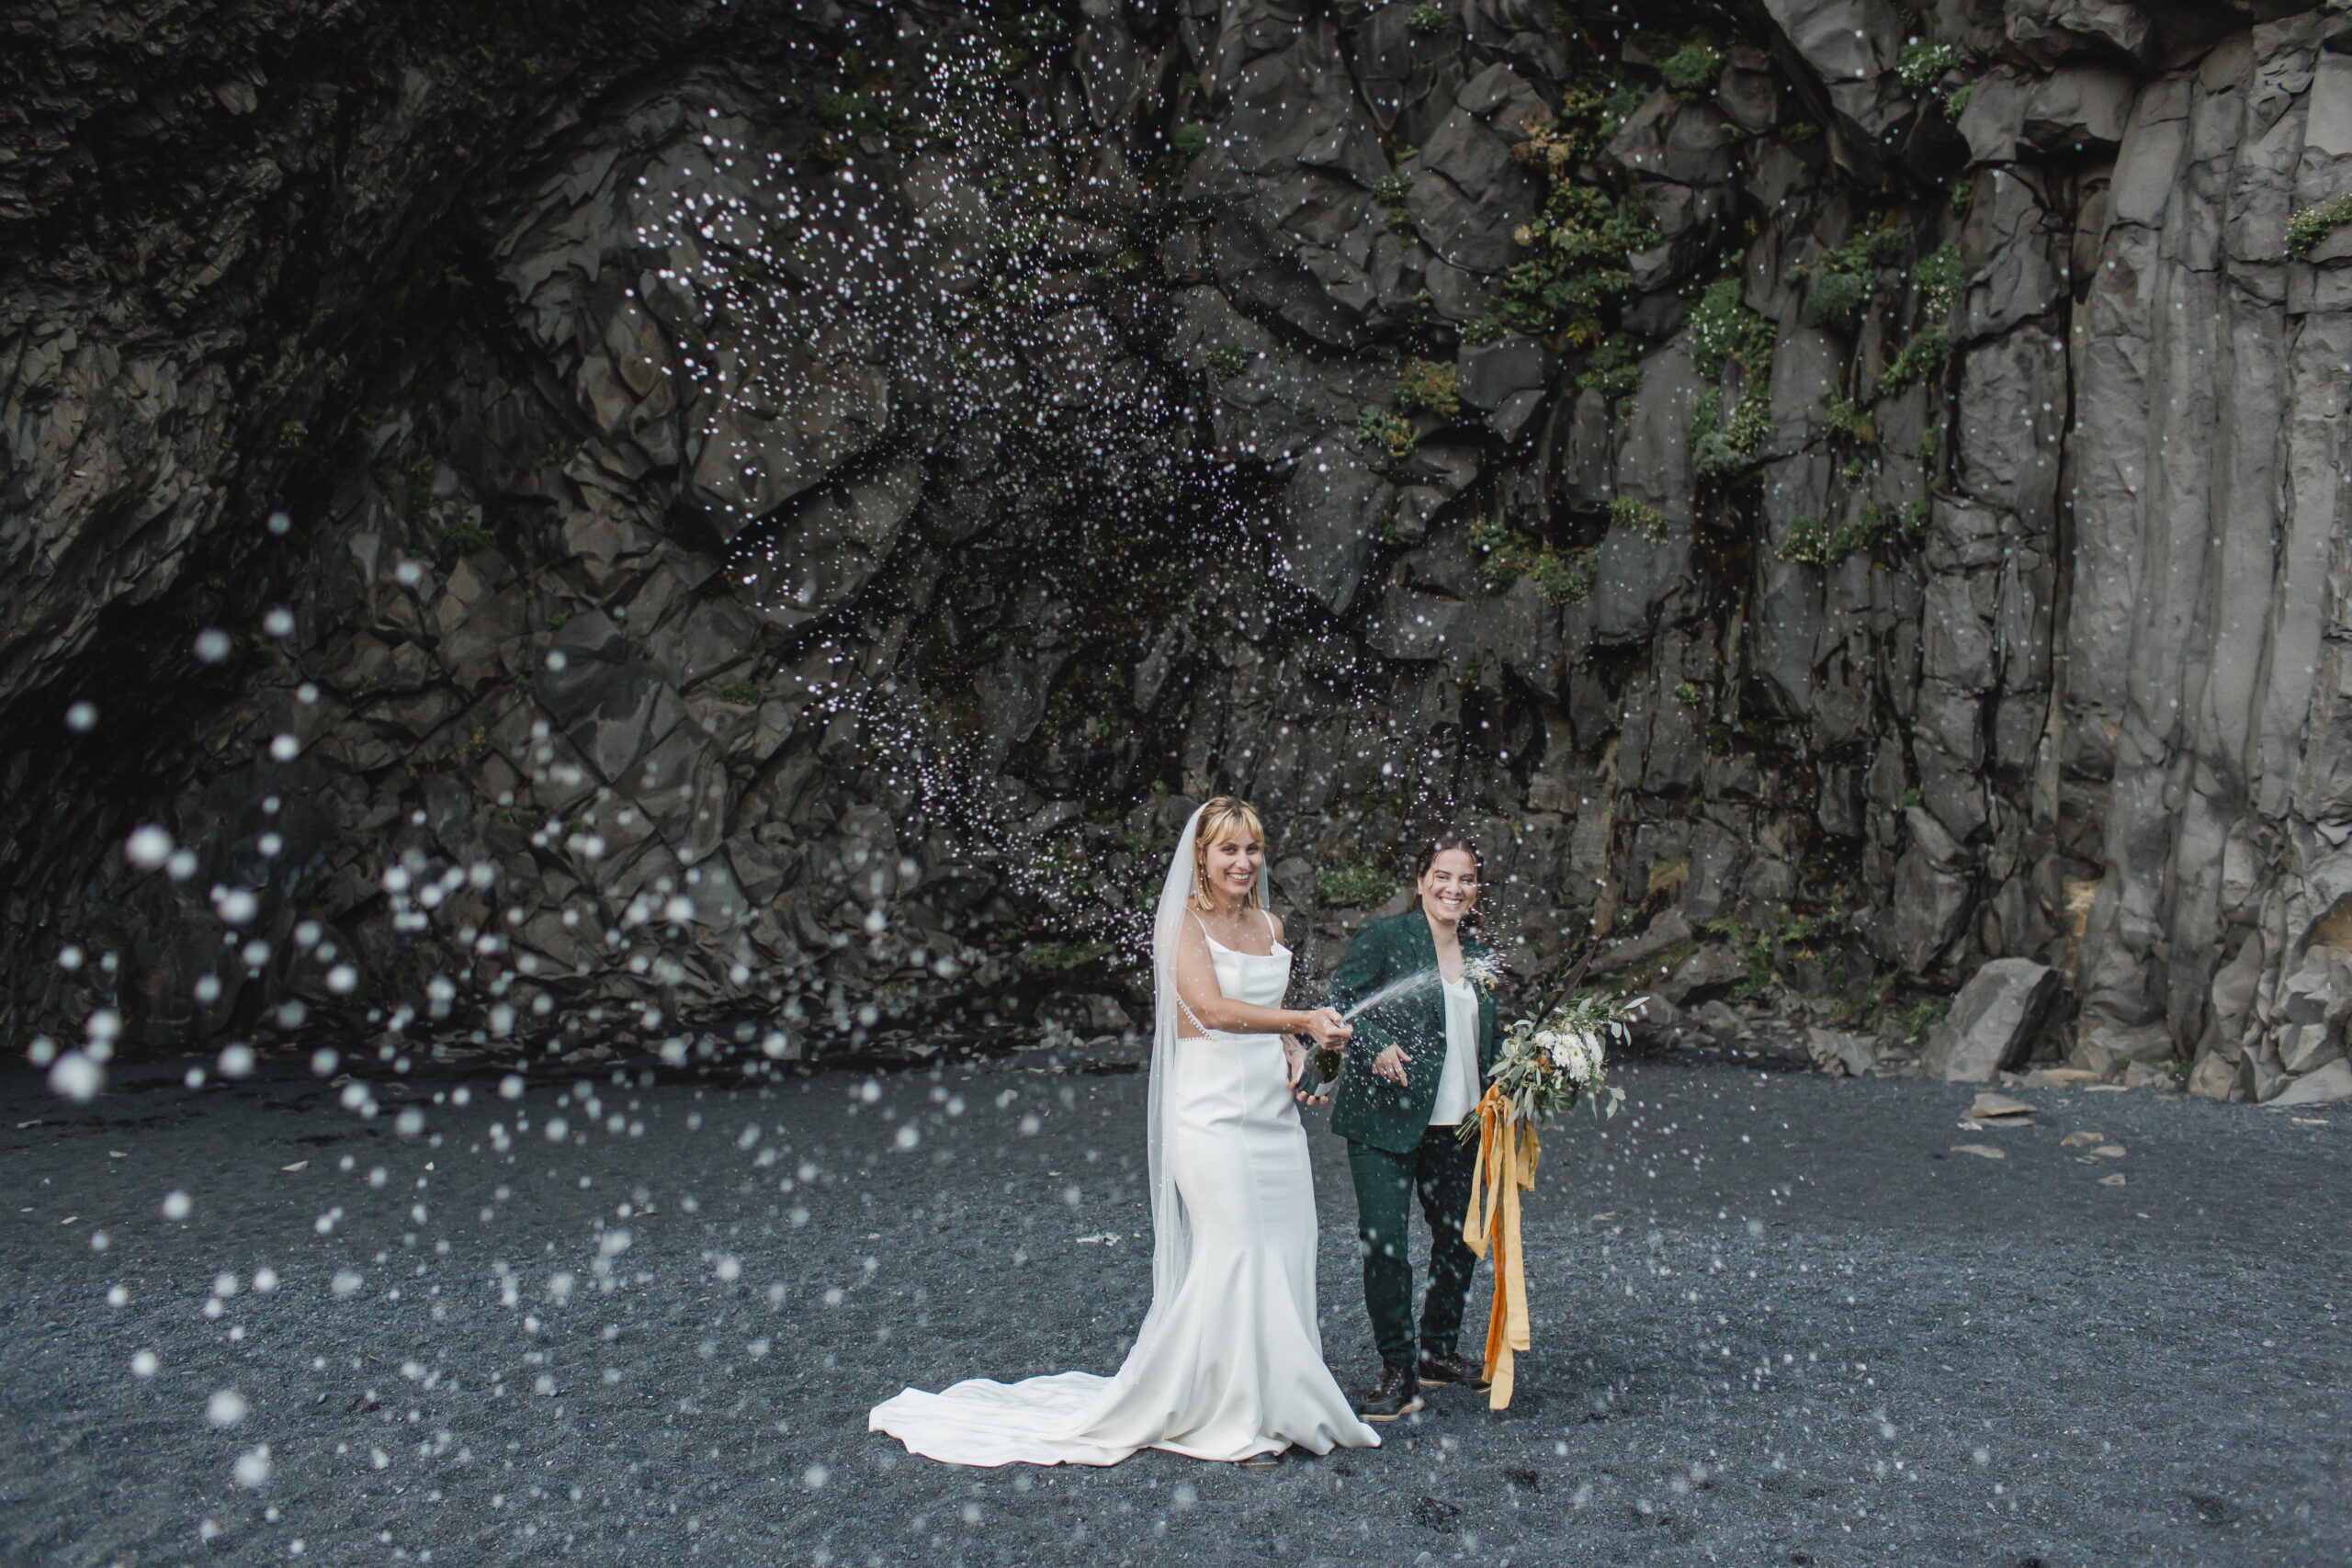 Kili and Joanna celebrating their elopement with champagne on black sand beach in Iceland